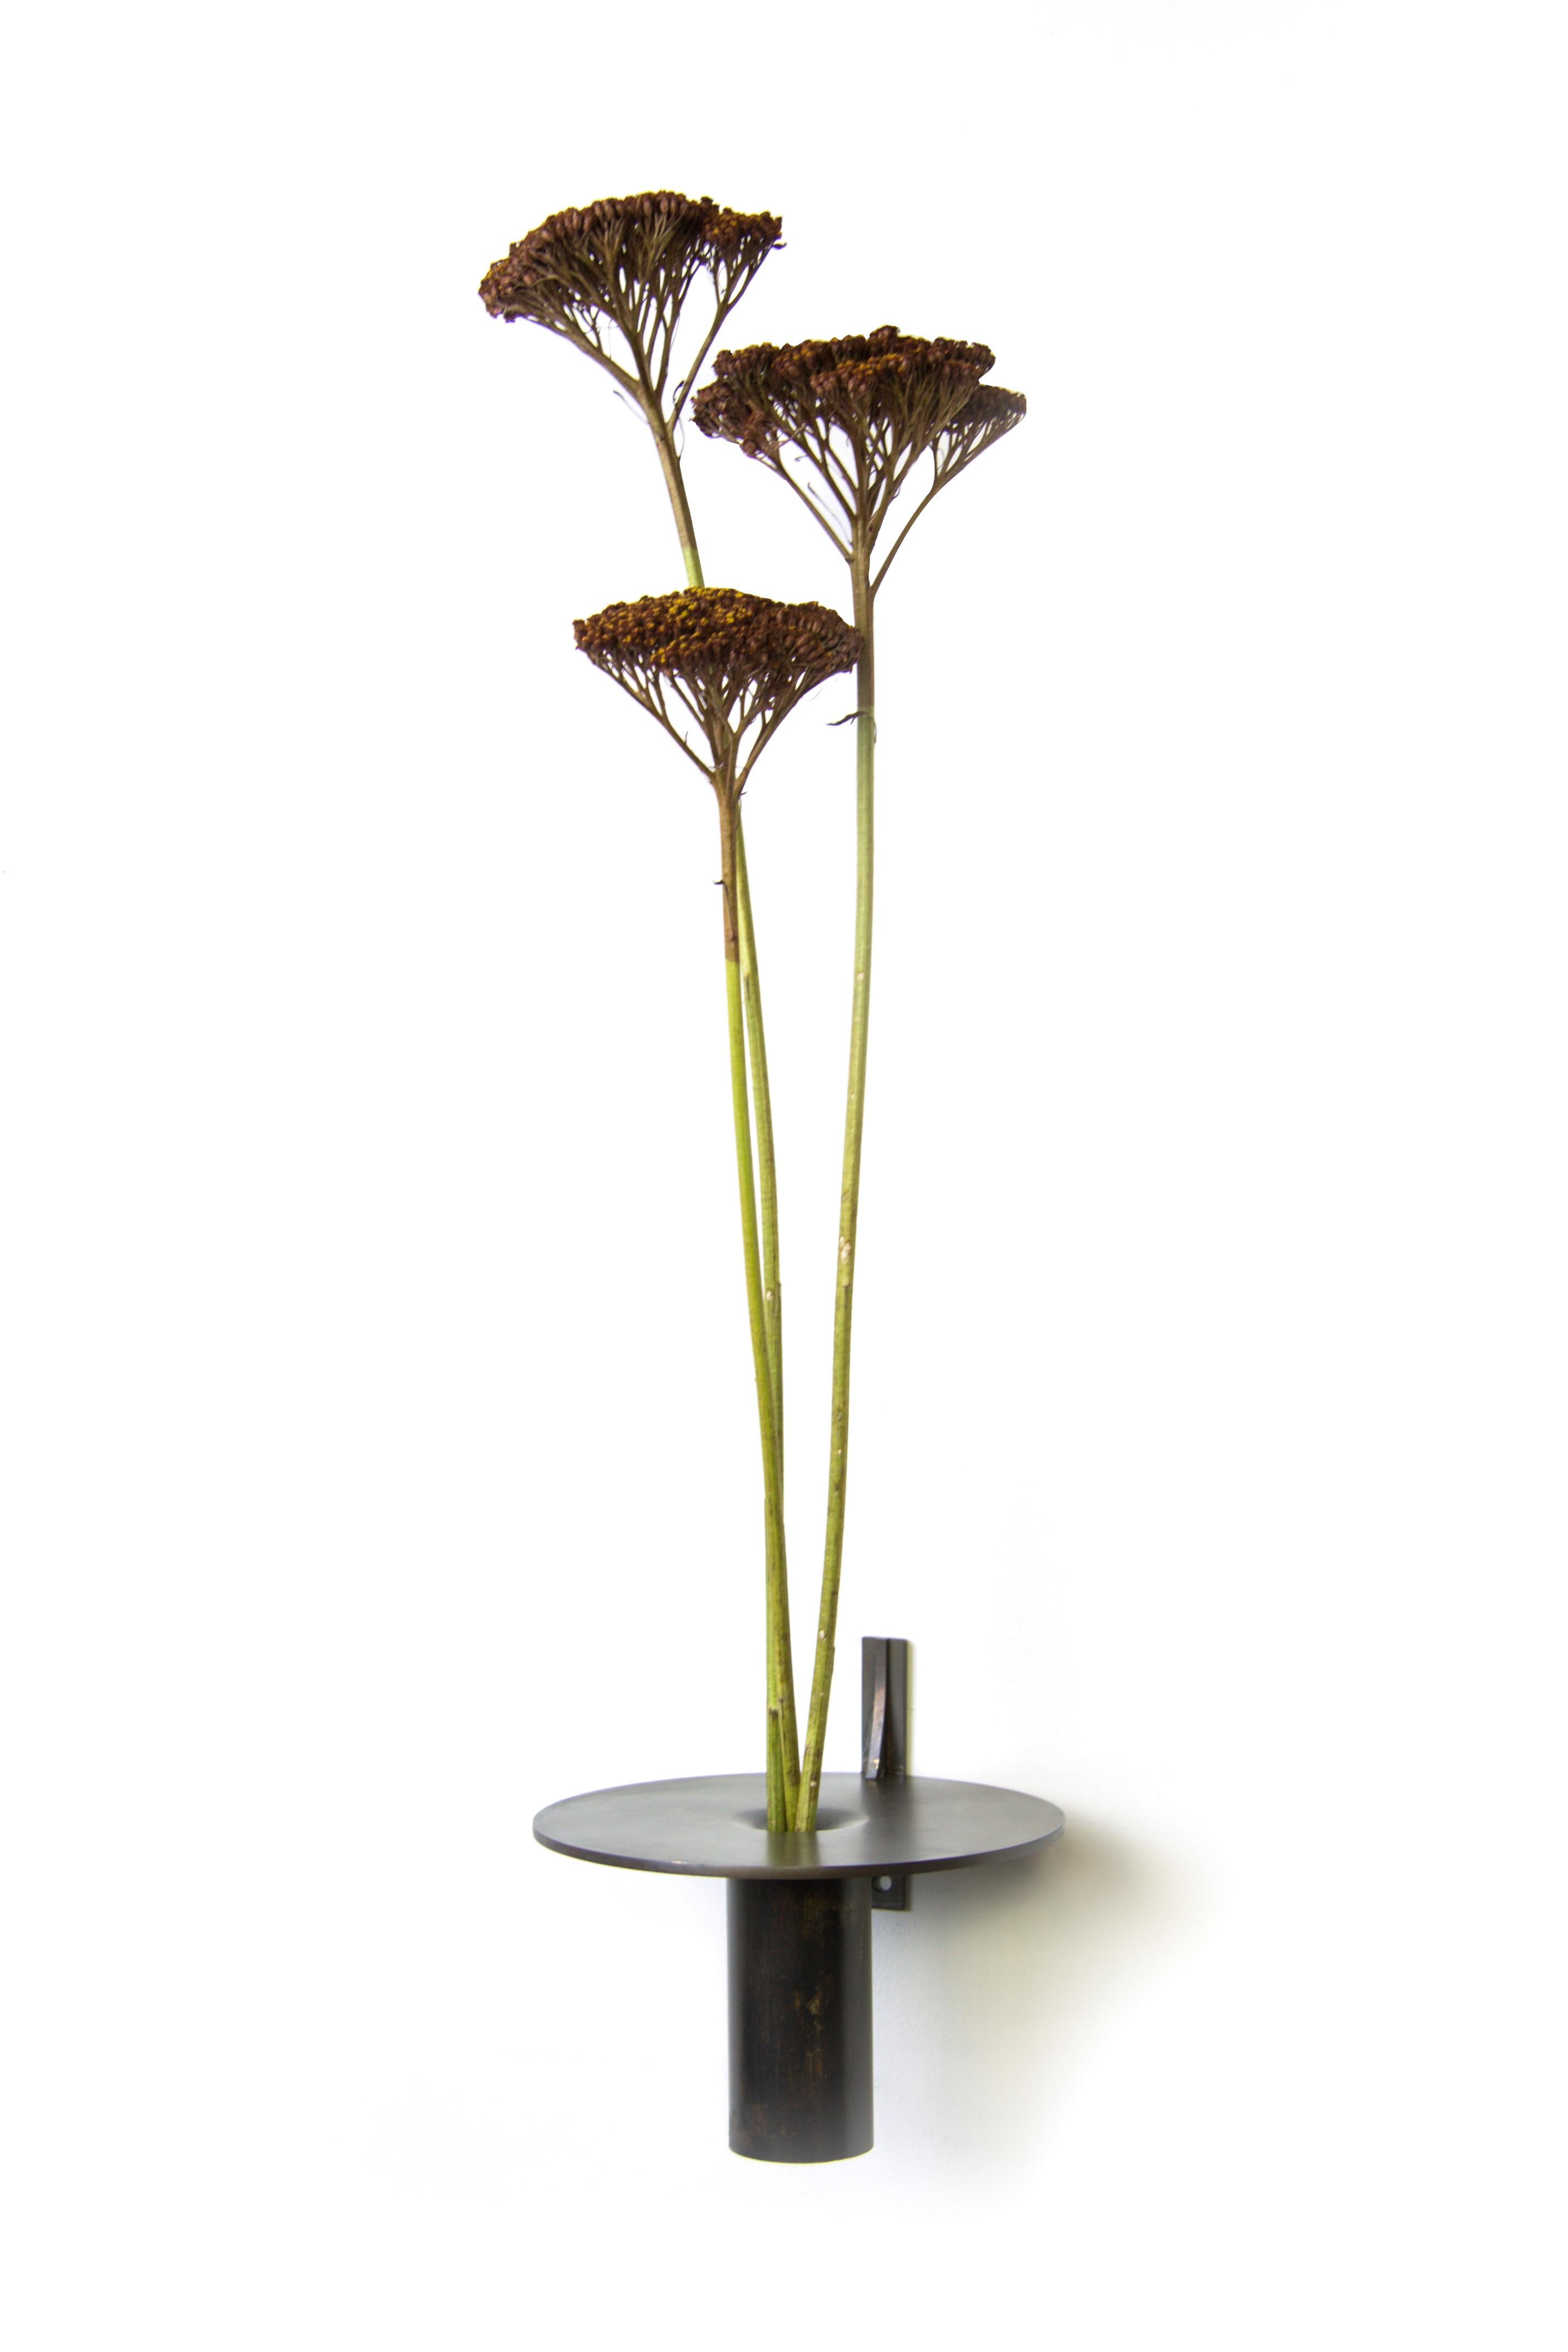 Bud wall vase by Gentner Design
Dimensions: D 14 x H 12 cm
Materials: patinated brass

Each of these delicately, handcrafted Wall Vase is perfect as an individual home accessory. Made of brass and hand tarnished, the Wall Vase can be massed to